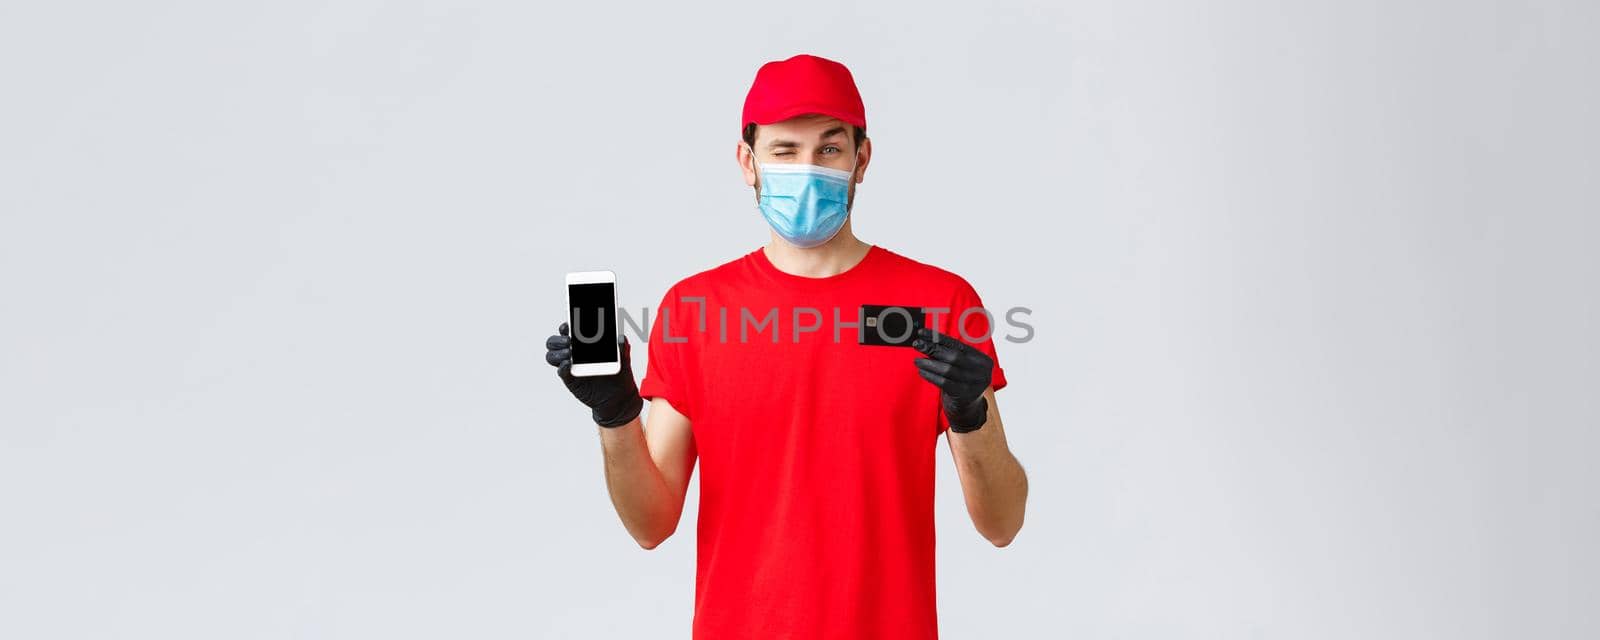 Contactless delivery, payment, online shopping during covid-19, self-quarantine. Handsome courier in red uniform, gloves and face mask, showing smartphone screen and credit card, promo of order app.